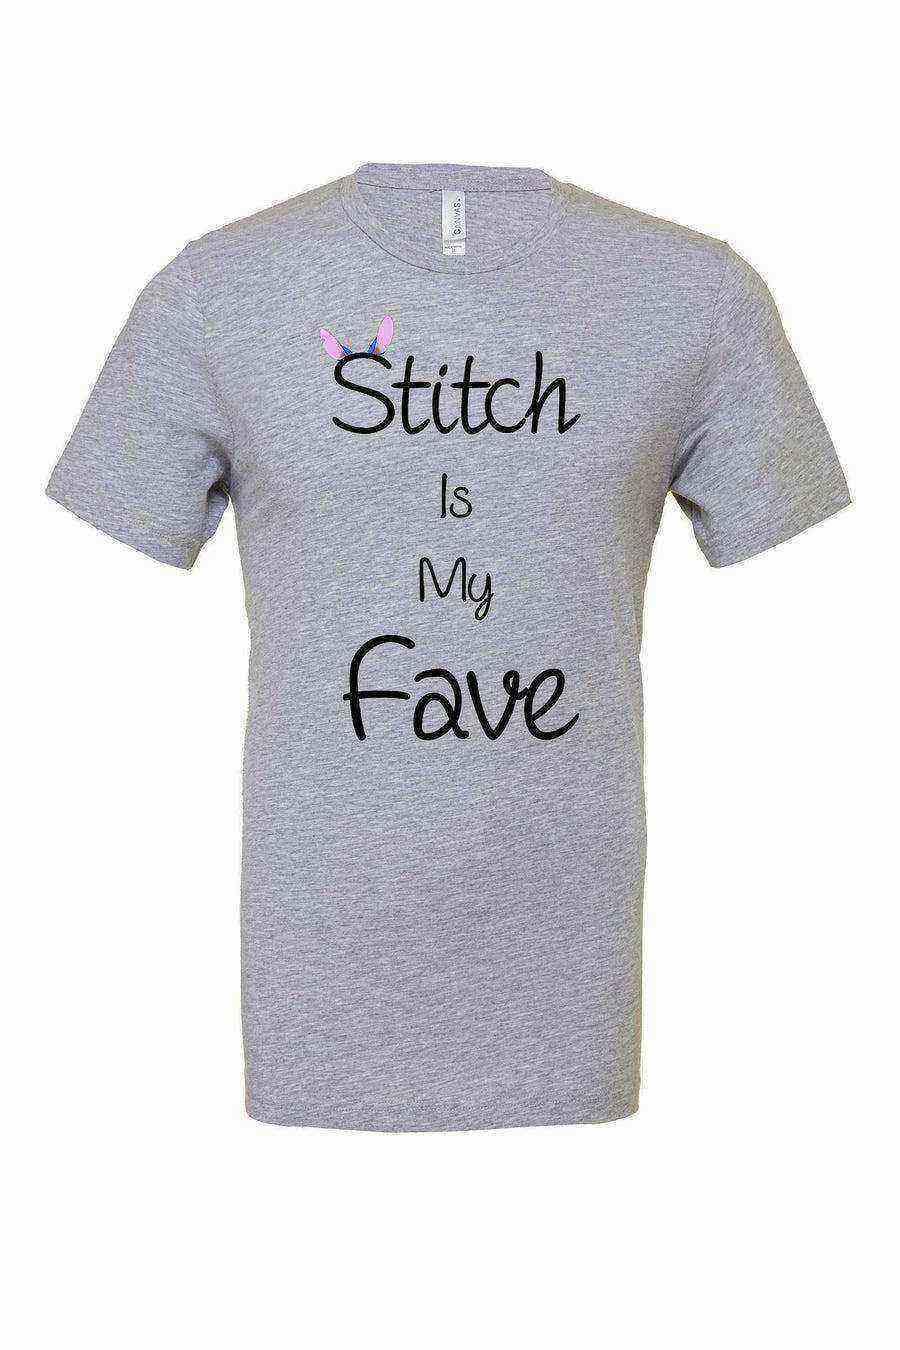 Womens | Stitch is my Fave Shirt - Dylan's Tees